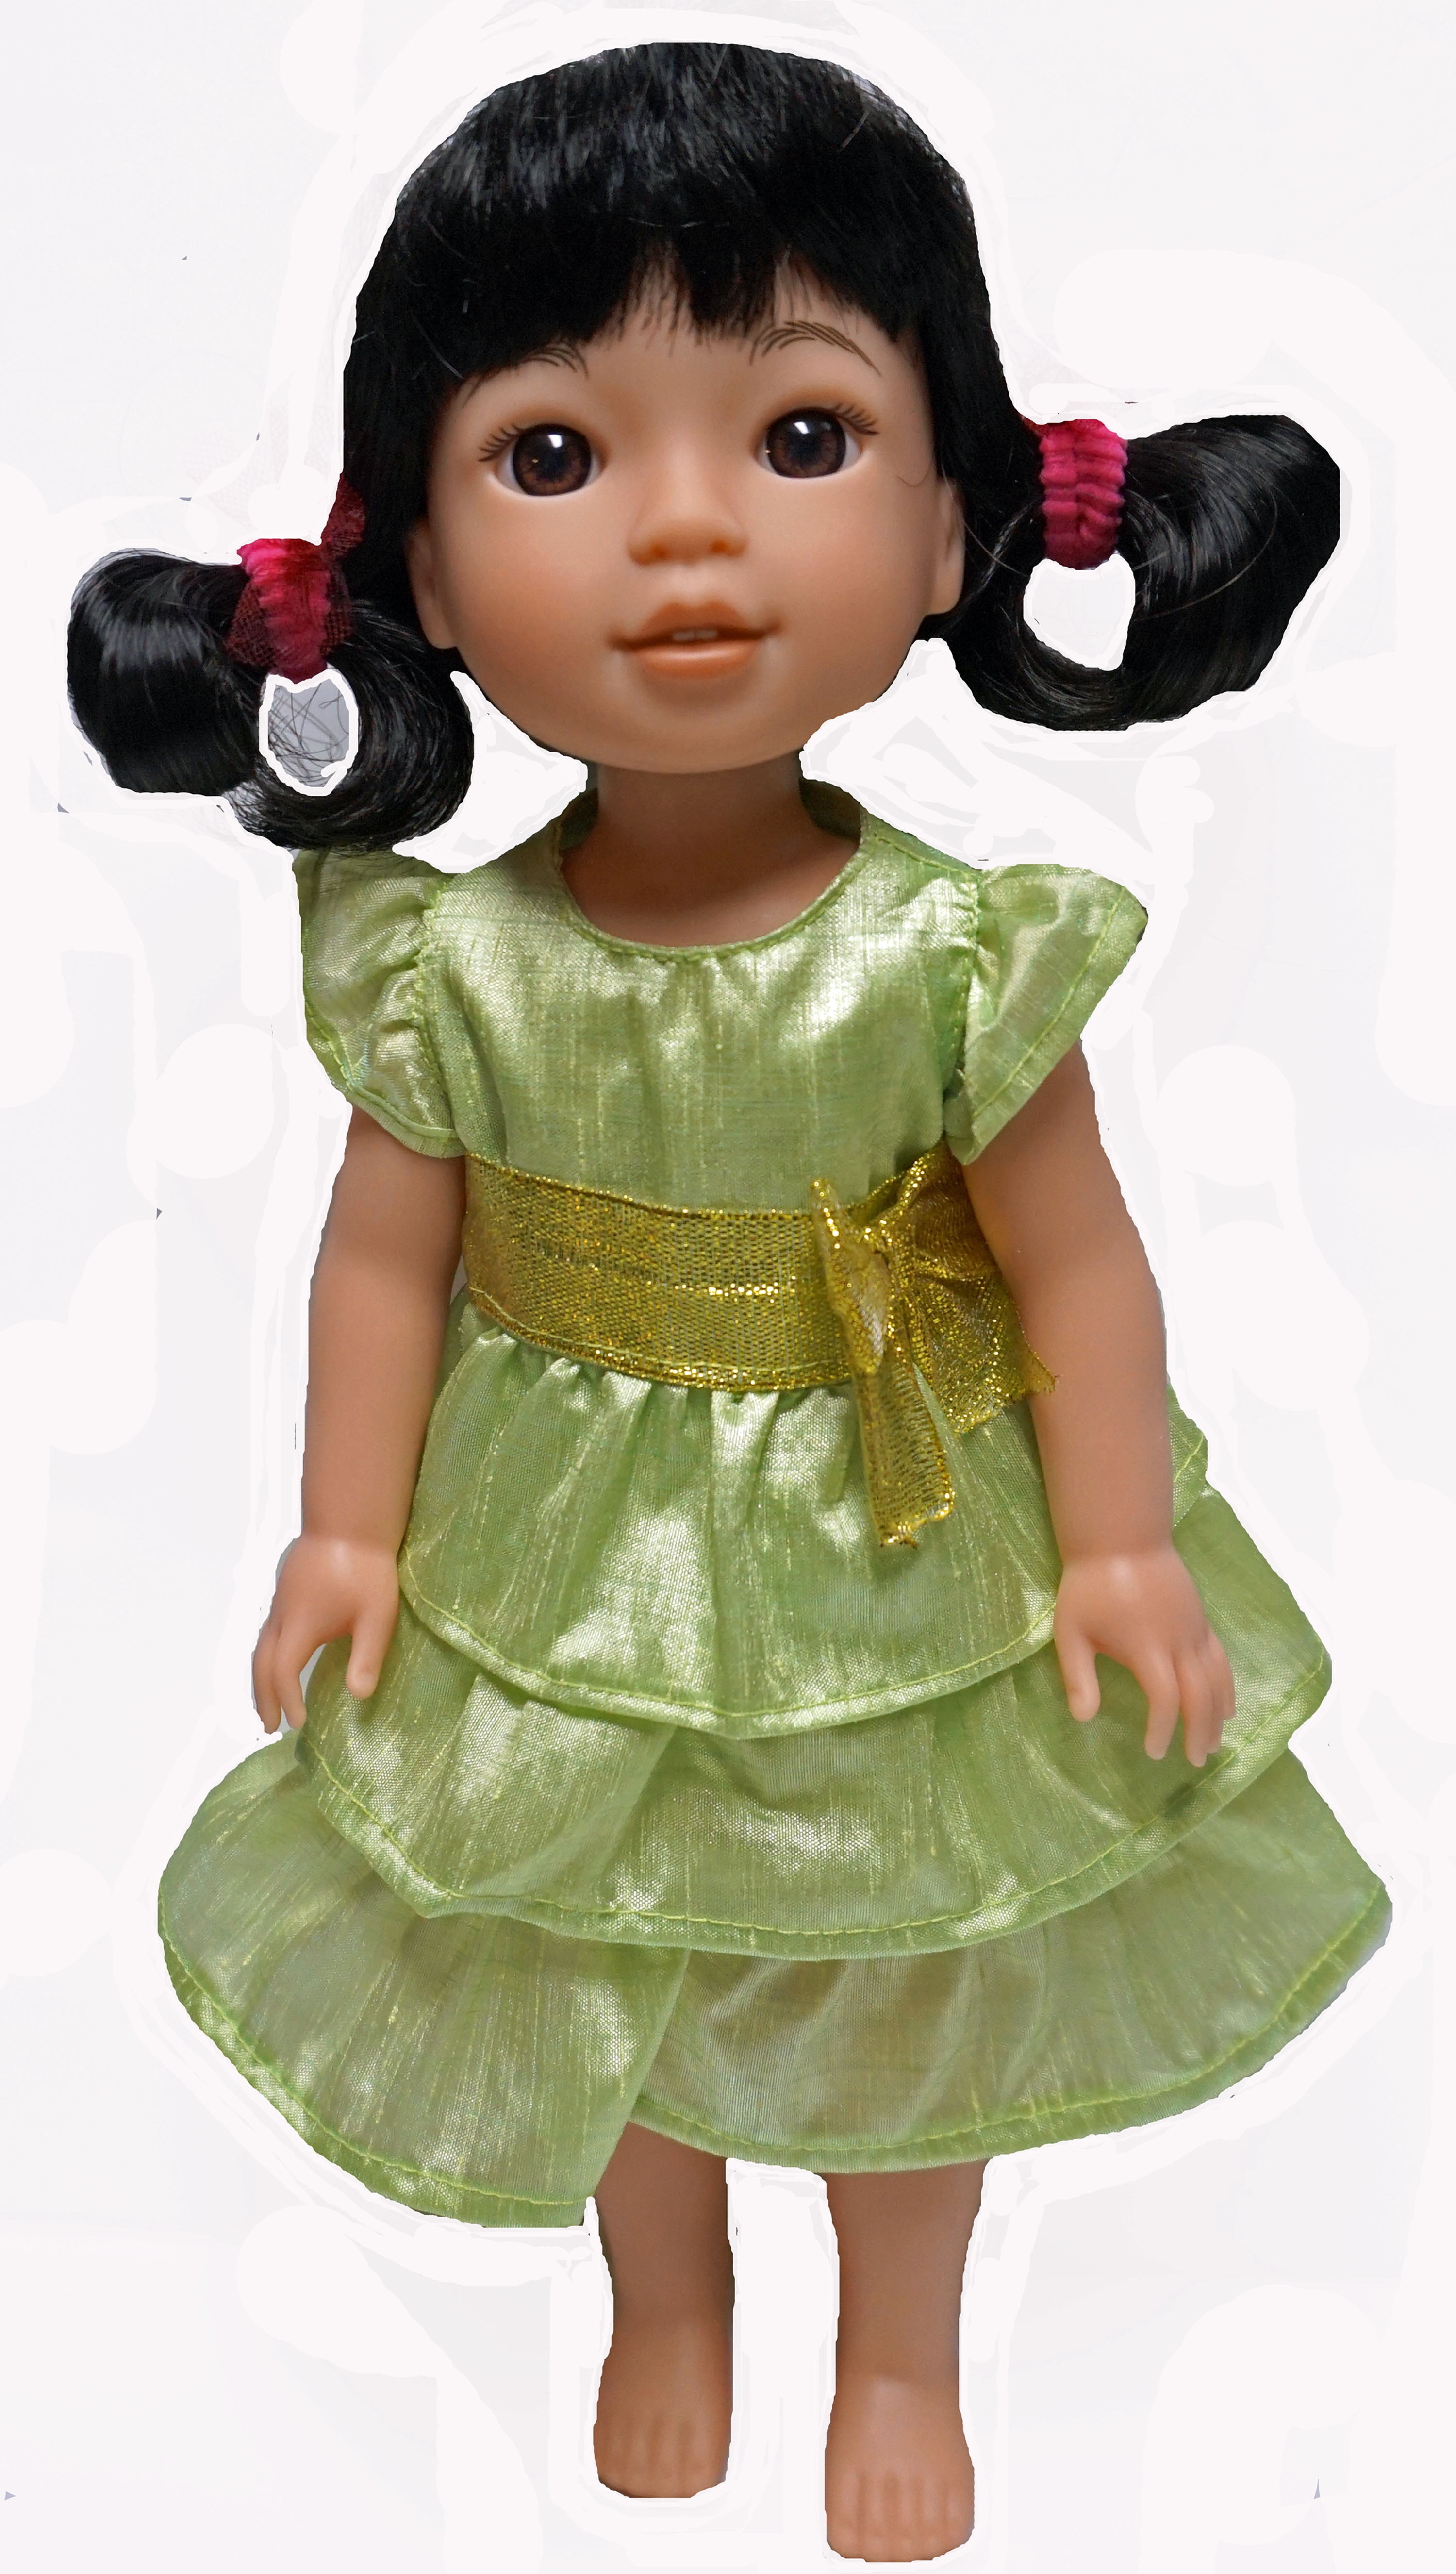 Big Flower Dress Fits 14.5 Inch Dolls Like Wellie Wisher Glitter Girl Dolls Doll Clothes Superstore